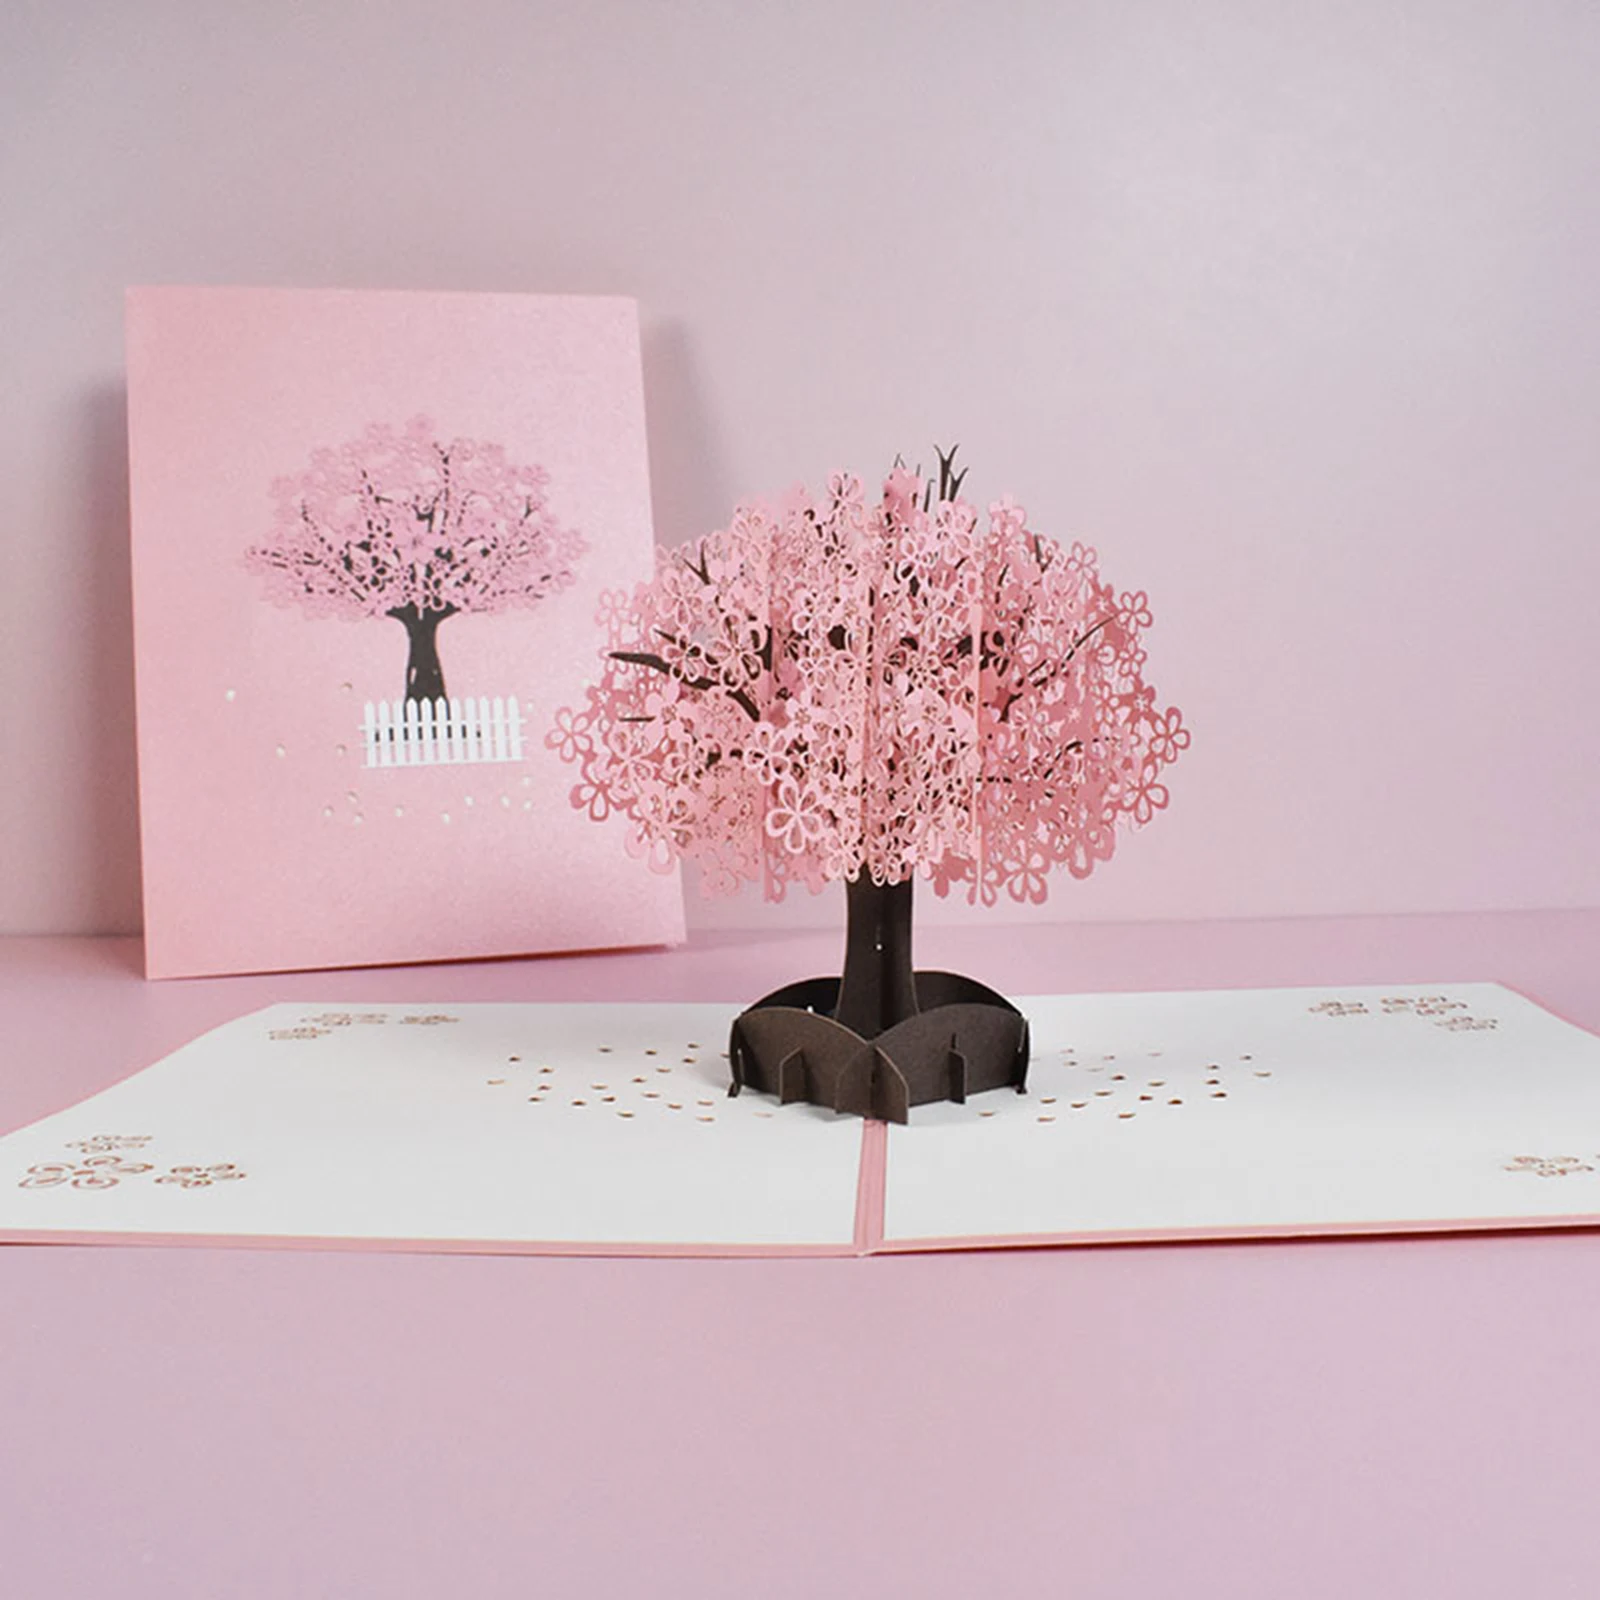 NACTECH 3D Pop Up Birthday Card for Wife Her Girlfriend Cherry Blossom Greeting Cards Mothers Day Card Anniversary Wedding Invitation Card with Envelope for Wedding Valentines Day Festival 